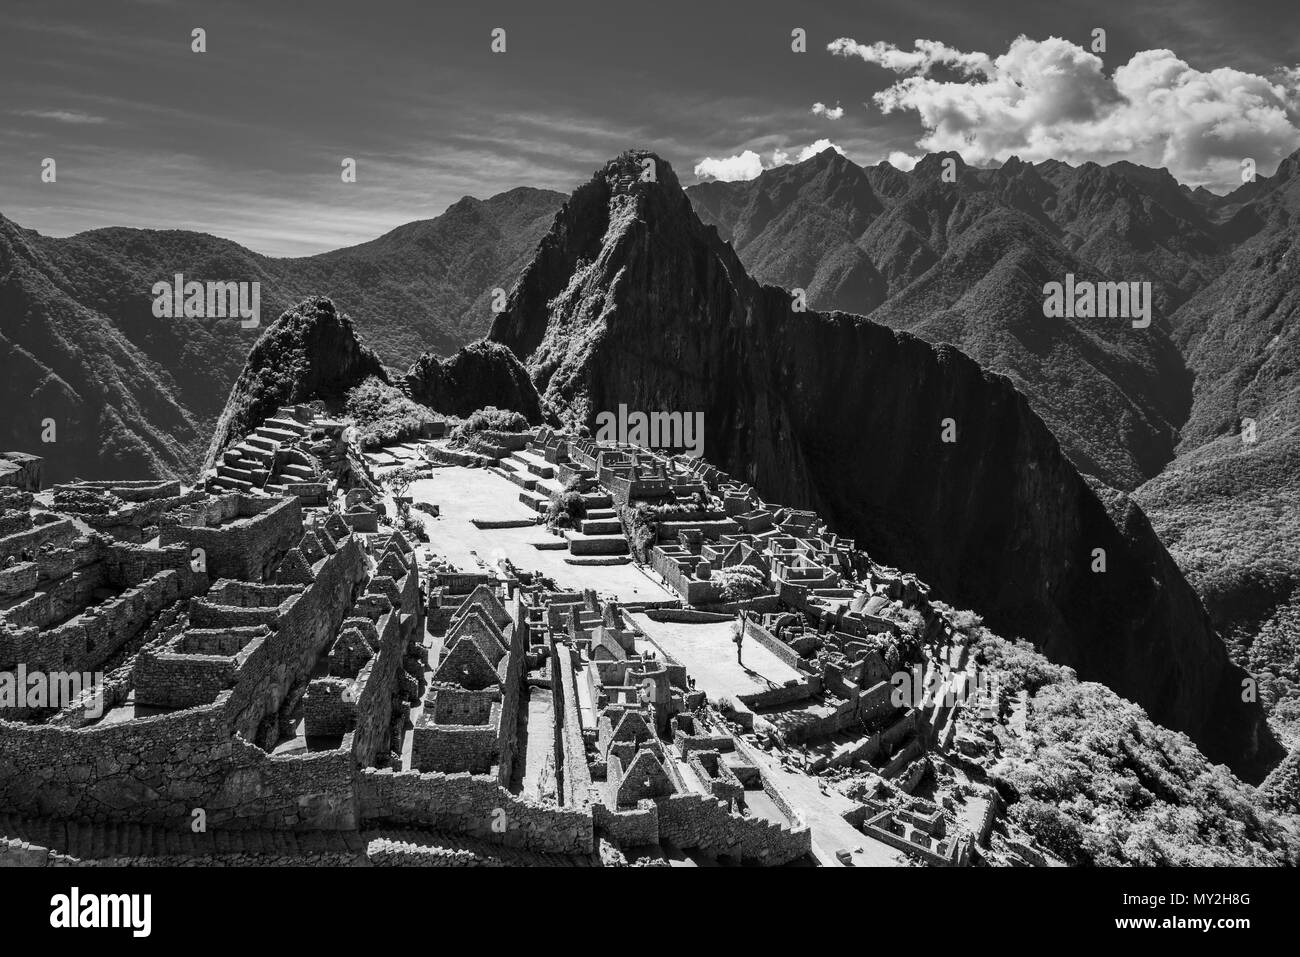 Black and white photograph of the lost city of the Inca, the Machu Picchu, in the sacred Urubamba valley near Cusco, Peru, South America. Stock Photo